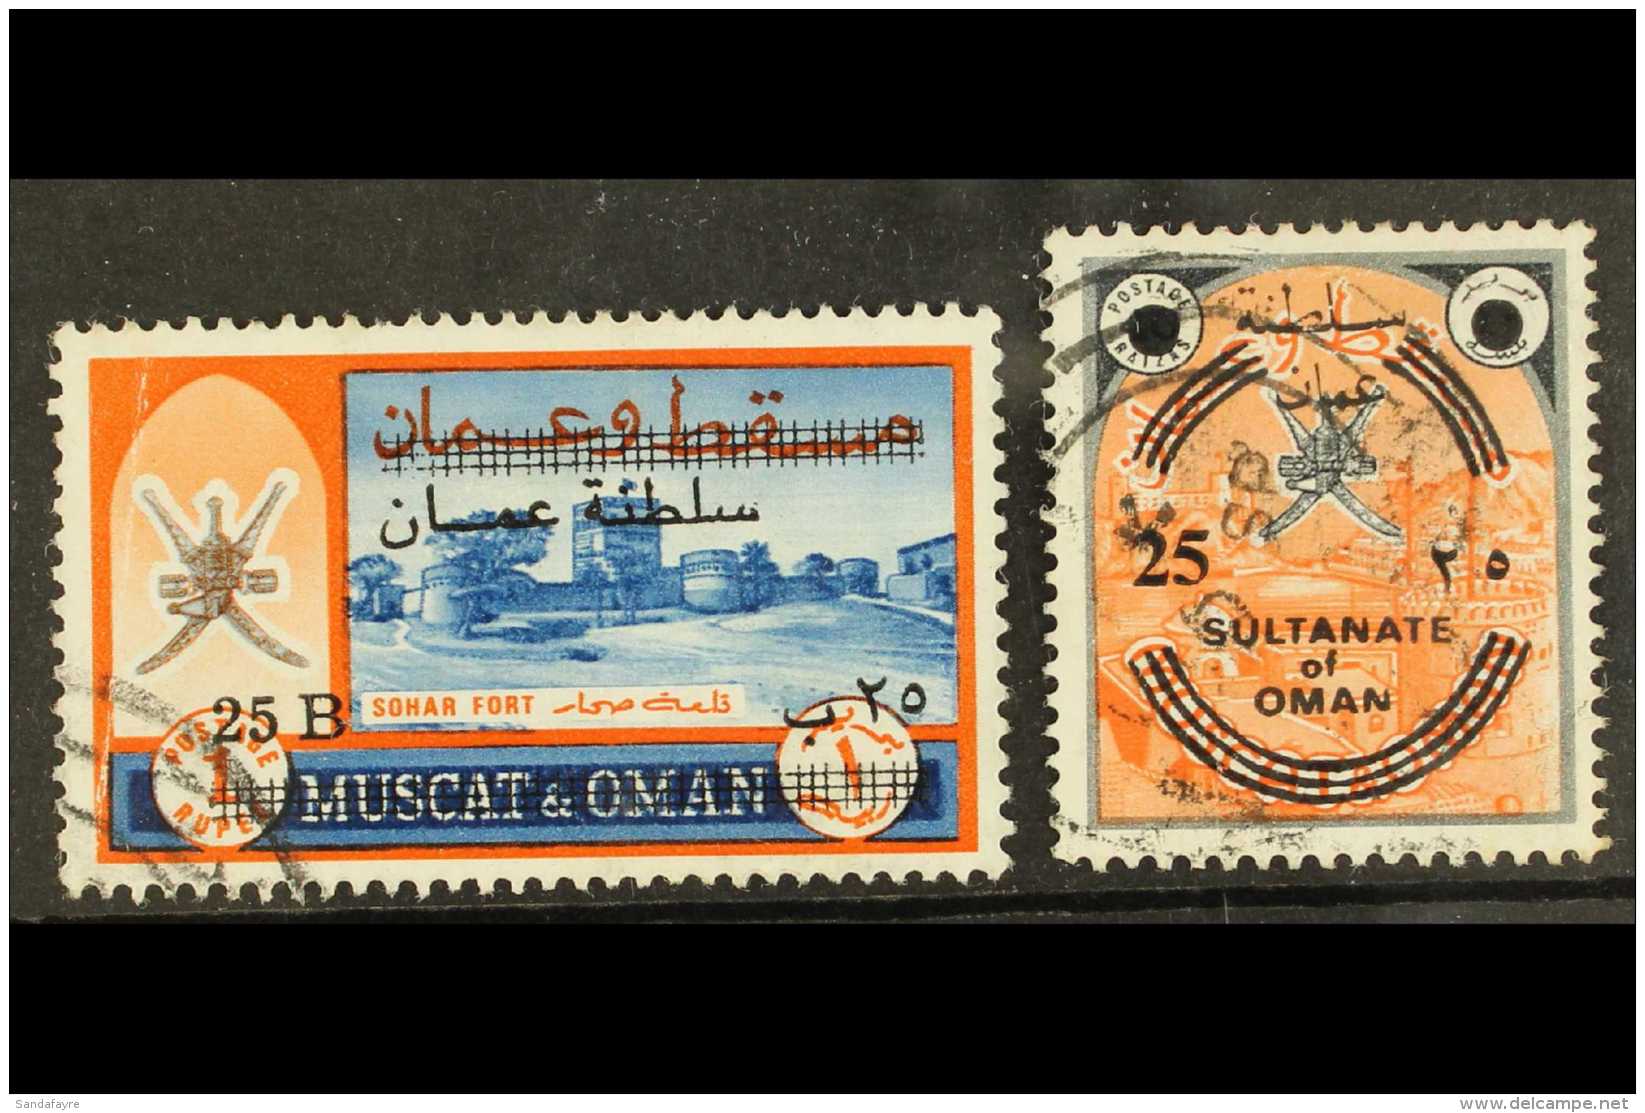 1972 SURCHARGES (6 Jun - 1 July) 25B On 1r And 25b On 40b, SG 144/145, Good Used, The 25B On 1r With Light Crease,... - Oman